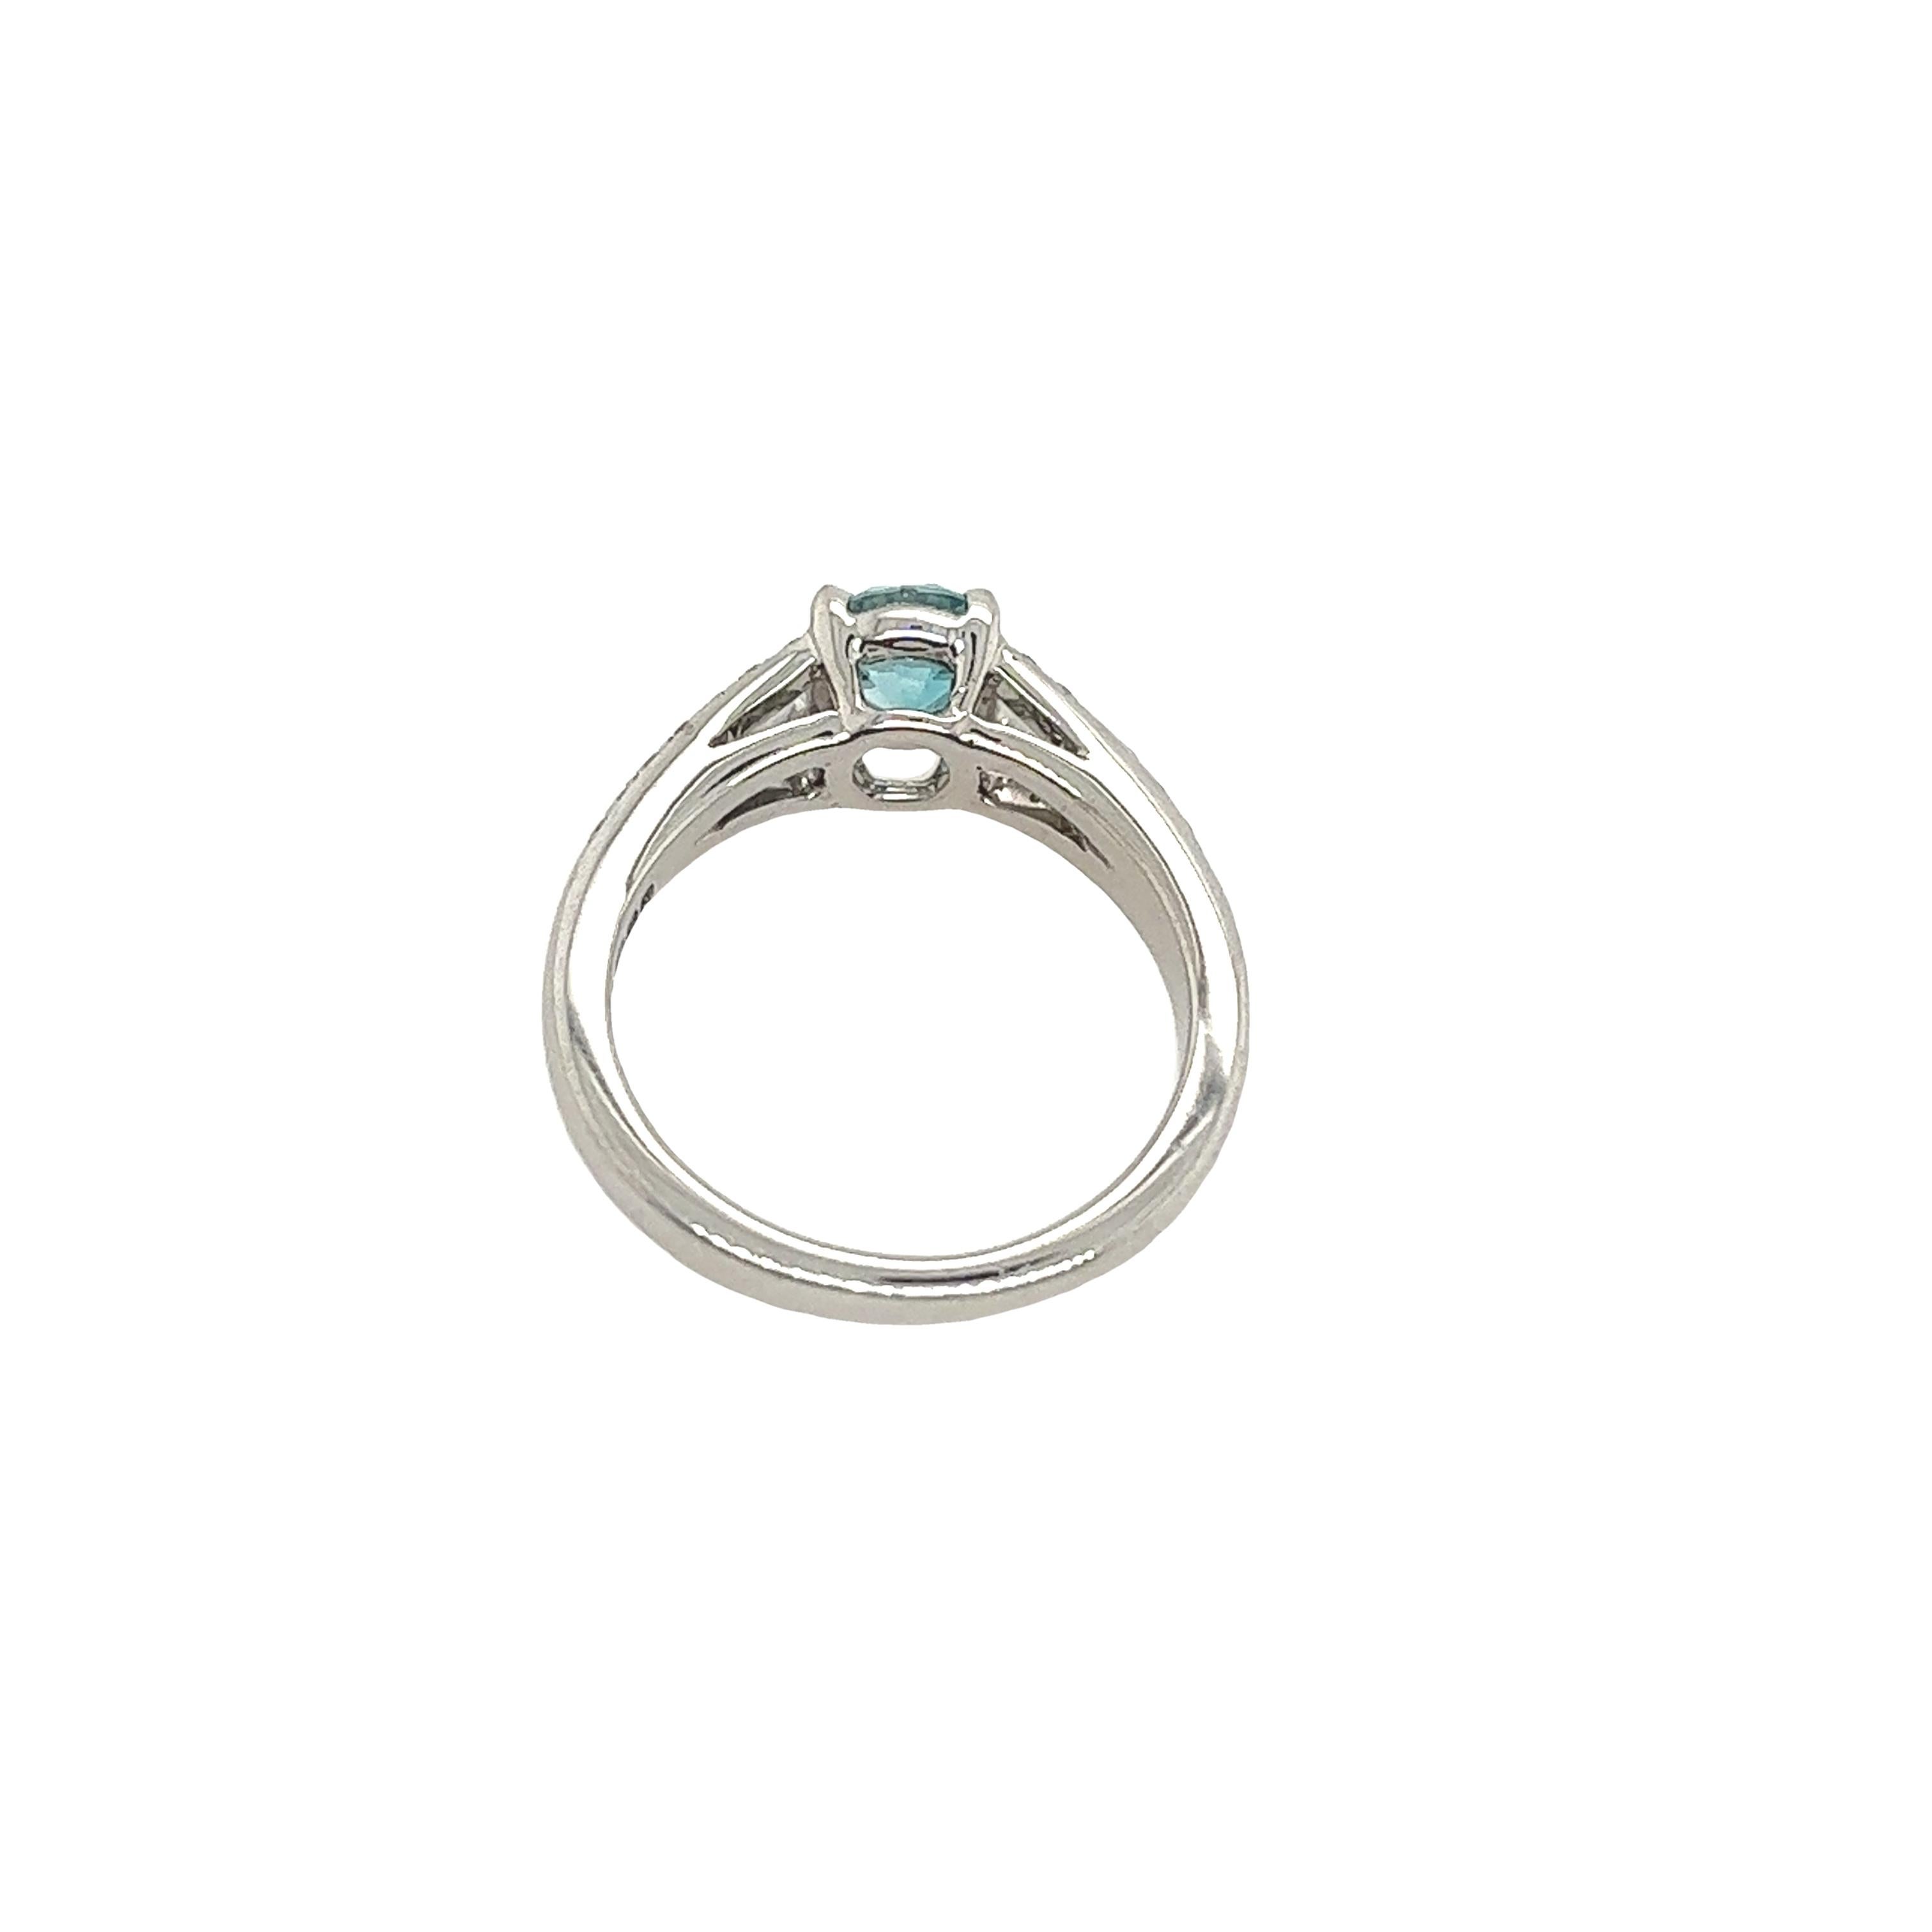 Classic fine quality London blue topaz ring with 28 round brilliant cut diamonds on the shoulders, total diamond weight is 0.14ct set in exquisite 18ct white gold.

Total Weight: 4.3g
Ring Size: I1/2
Width of Band: 2.13mm
Width of Head: